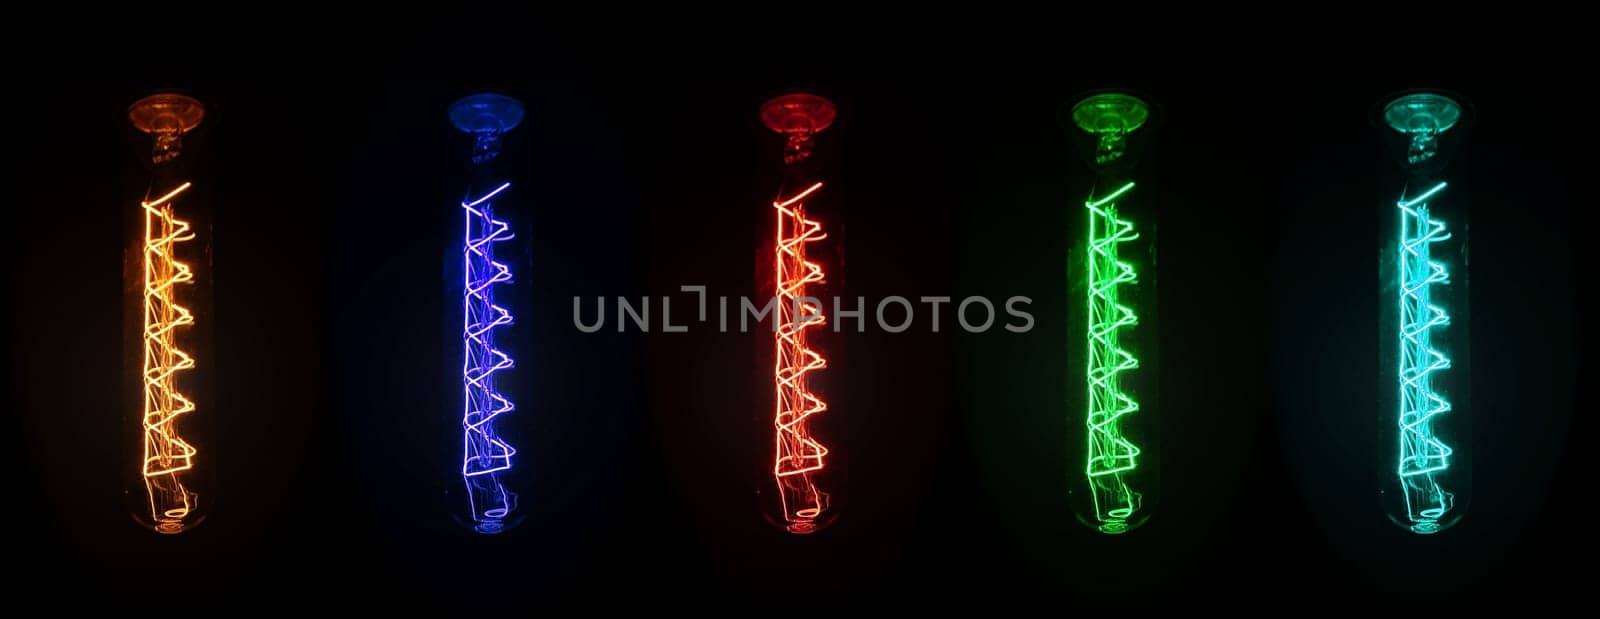 Retro looking light bulb glowing on dark background, bright wire visible in glass - colour can be changed with hue / saturation tool